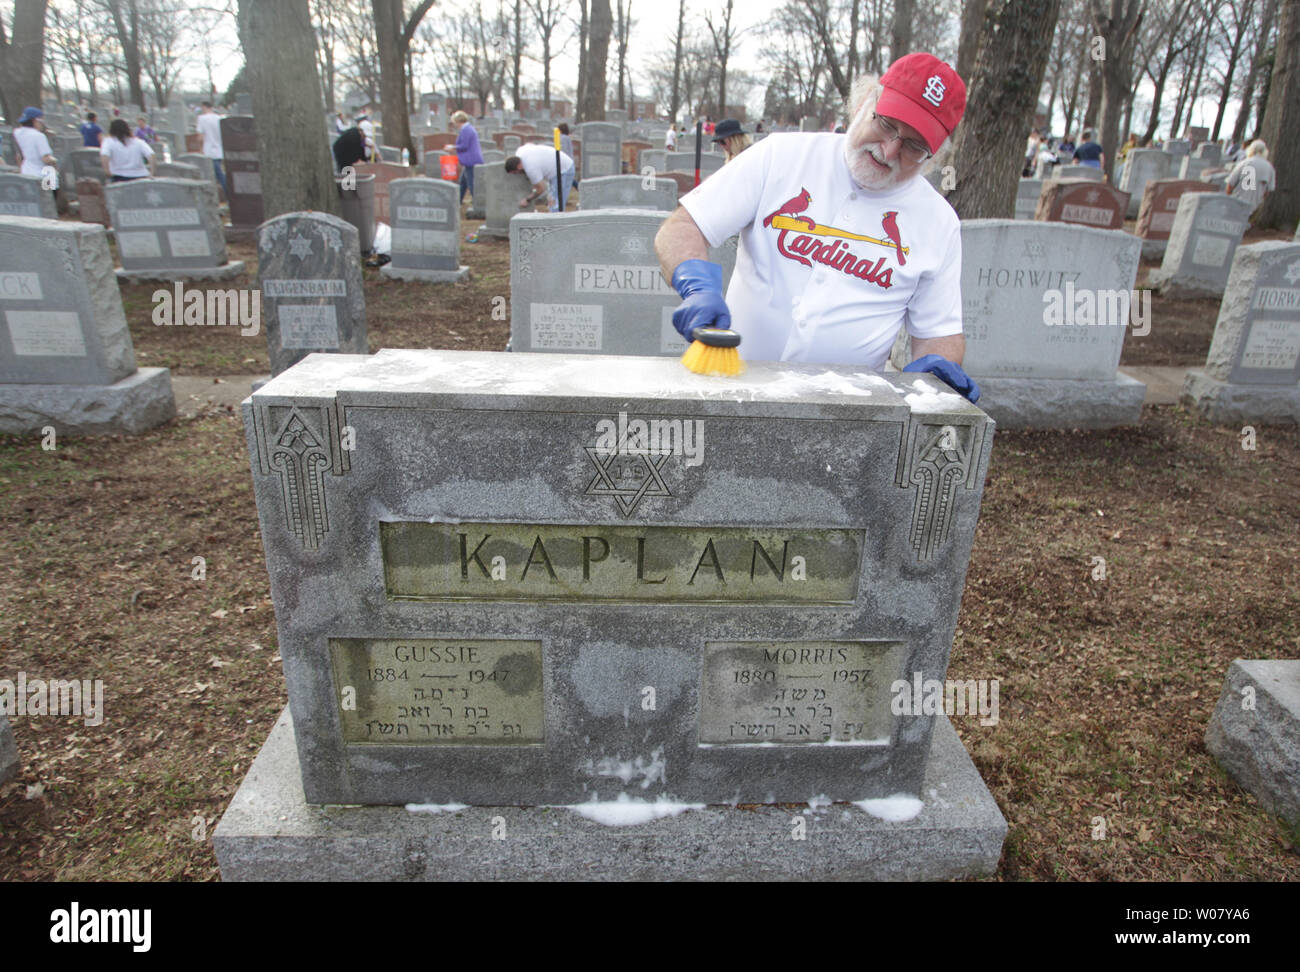 Dr. Steve Brown uses a brush and soap to clean a headstone at Chesed Shel Emeth Cemetery in University City, Missouri on February 22, 2017. Vandals toppled nearly 200 headstones on February 20, 2017 in the Jewish cemetery. A large community cleanup effort  attracted over four thousand people.  Photo by Bill Greenblatt/UPI Stock Photo